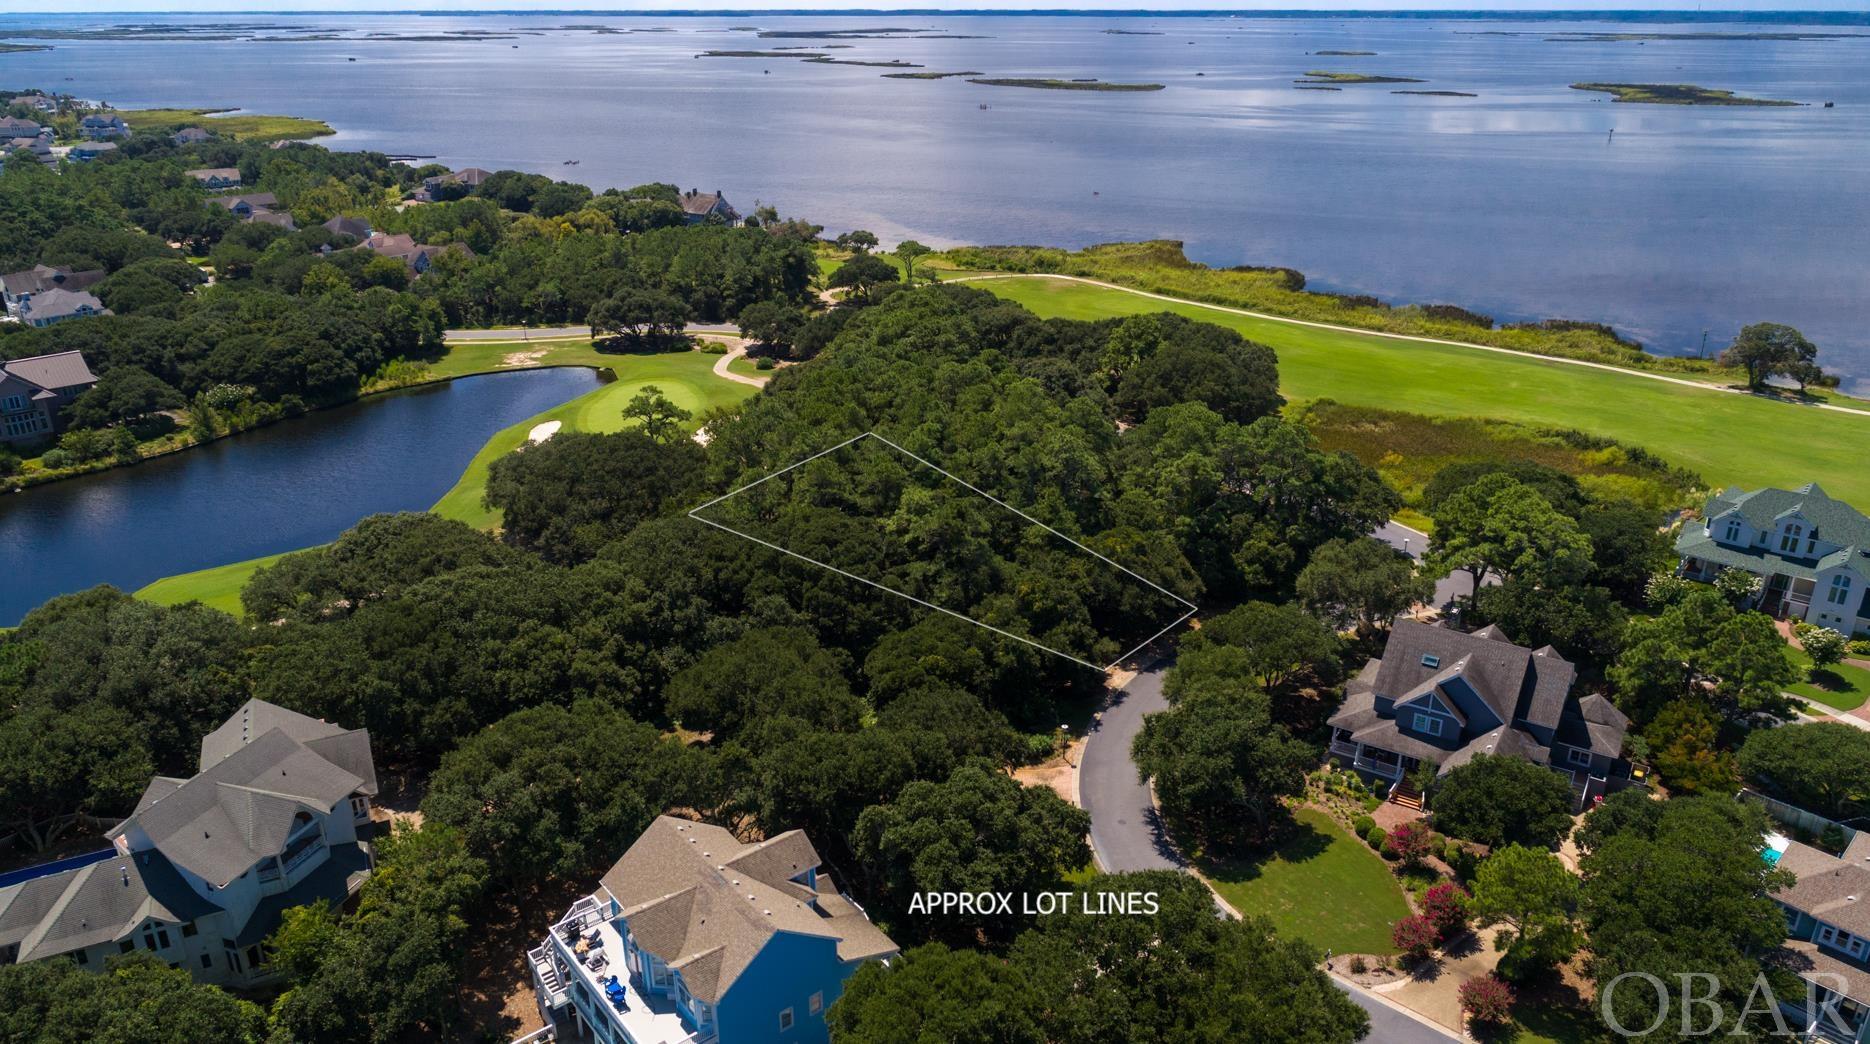 Beautiful homesite overlooking the 6th hole of the Currituck Club Golf Course with potential sound views. Build your dream home in this prestigious gated community of Corolla! The lot backs up to the 6th hole, so that you'd enjoy golf and water views on the south side of the home. Enjoy all the amenities that the Currituck Club has to offer-- including private beach access with valet trolley service, a Rees Jones designed 18 hole golf course with driving range, pro shop, and Bistro. Multiple community pools, tennis courts, and a fitness and health center make this community ideal for full time ownership or provide great options for a guests looking for an idyllic rental. Well appointed and located minutes away from shopping and dining in Corolla. The historical Whalehead Park, Corolla Lighthouse, and the 4-wheel drive beaches are just minutes away!